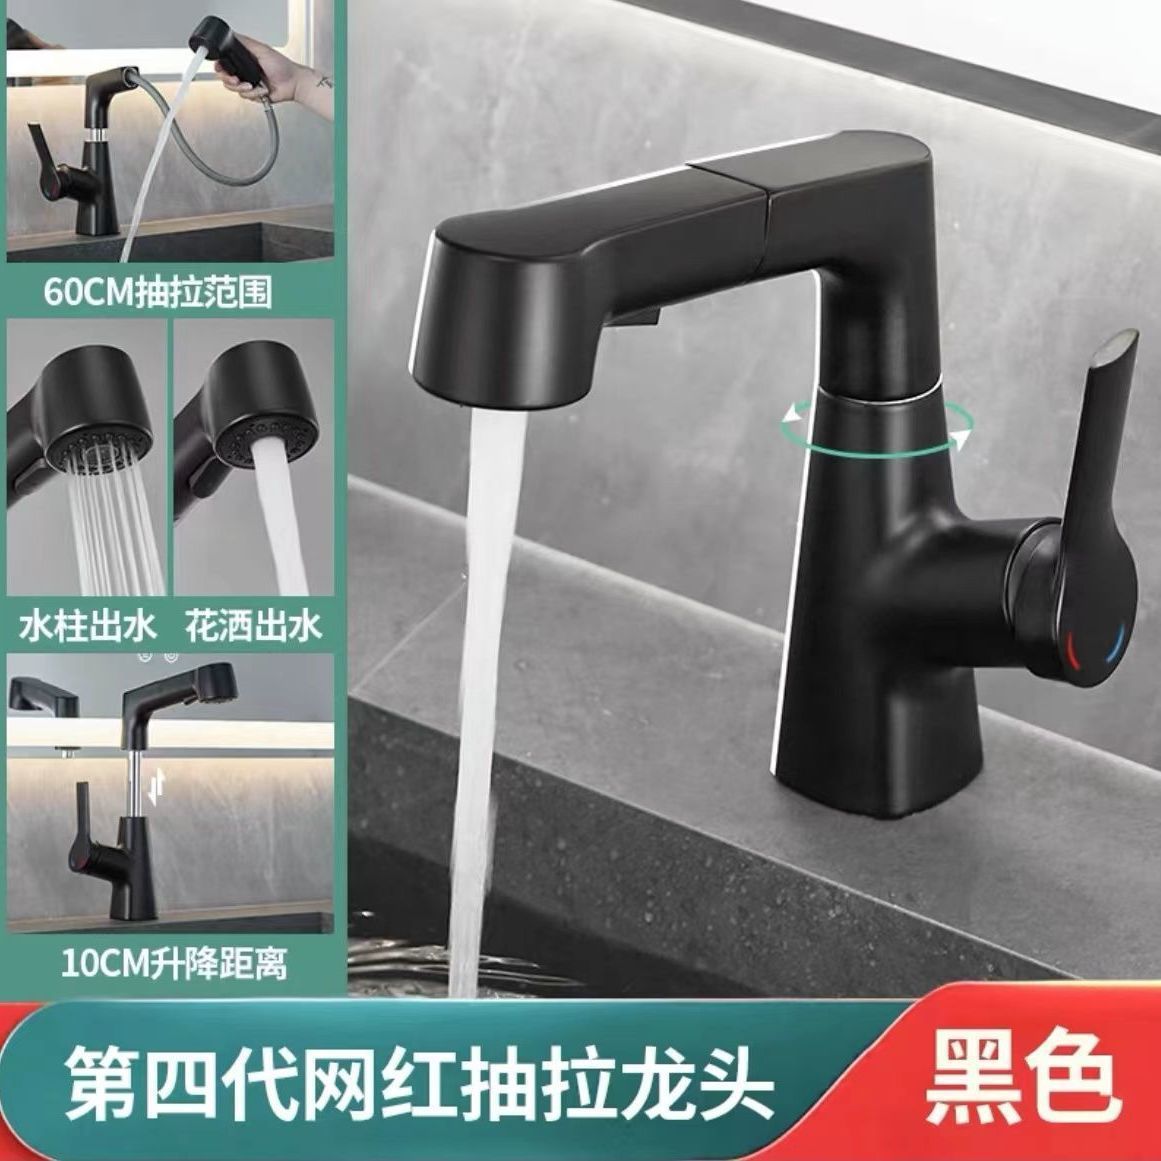 Copper Basin Faucet Bathroom Hot and Cold Multi-Functional Pull-out Bathroom Sink Washbasin Water Lifting Faucet Water Tap